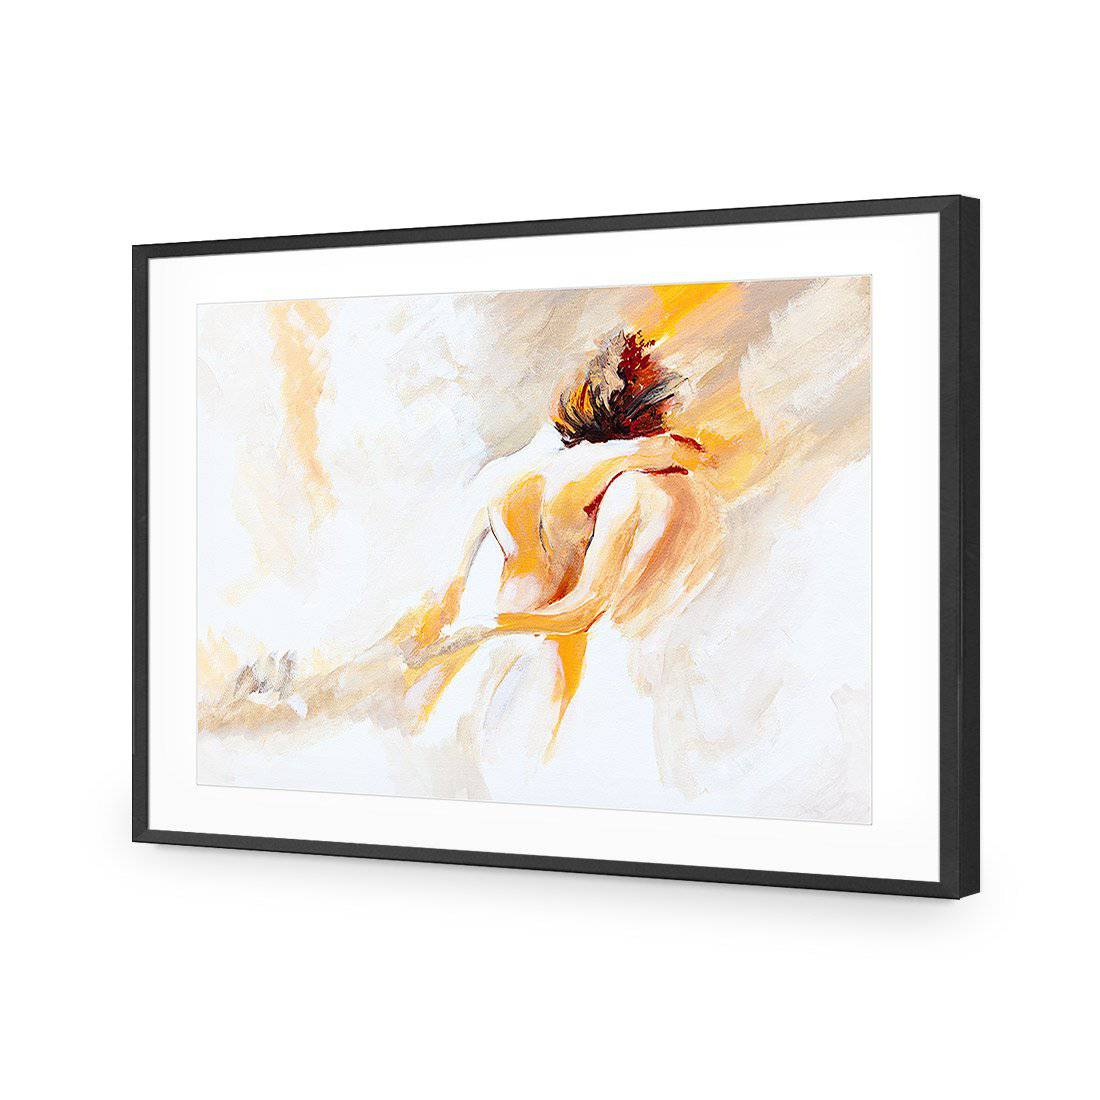 Naked Emotion-Acrylic-Wall Art Design-With Border-Acrylic - Black Frame-45x30cm-Wall Art Designs